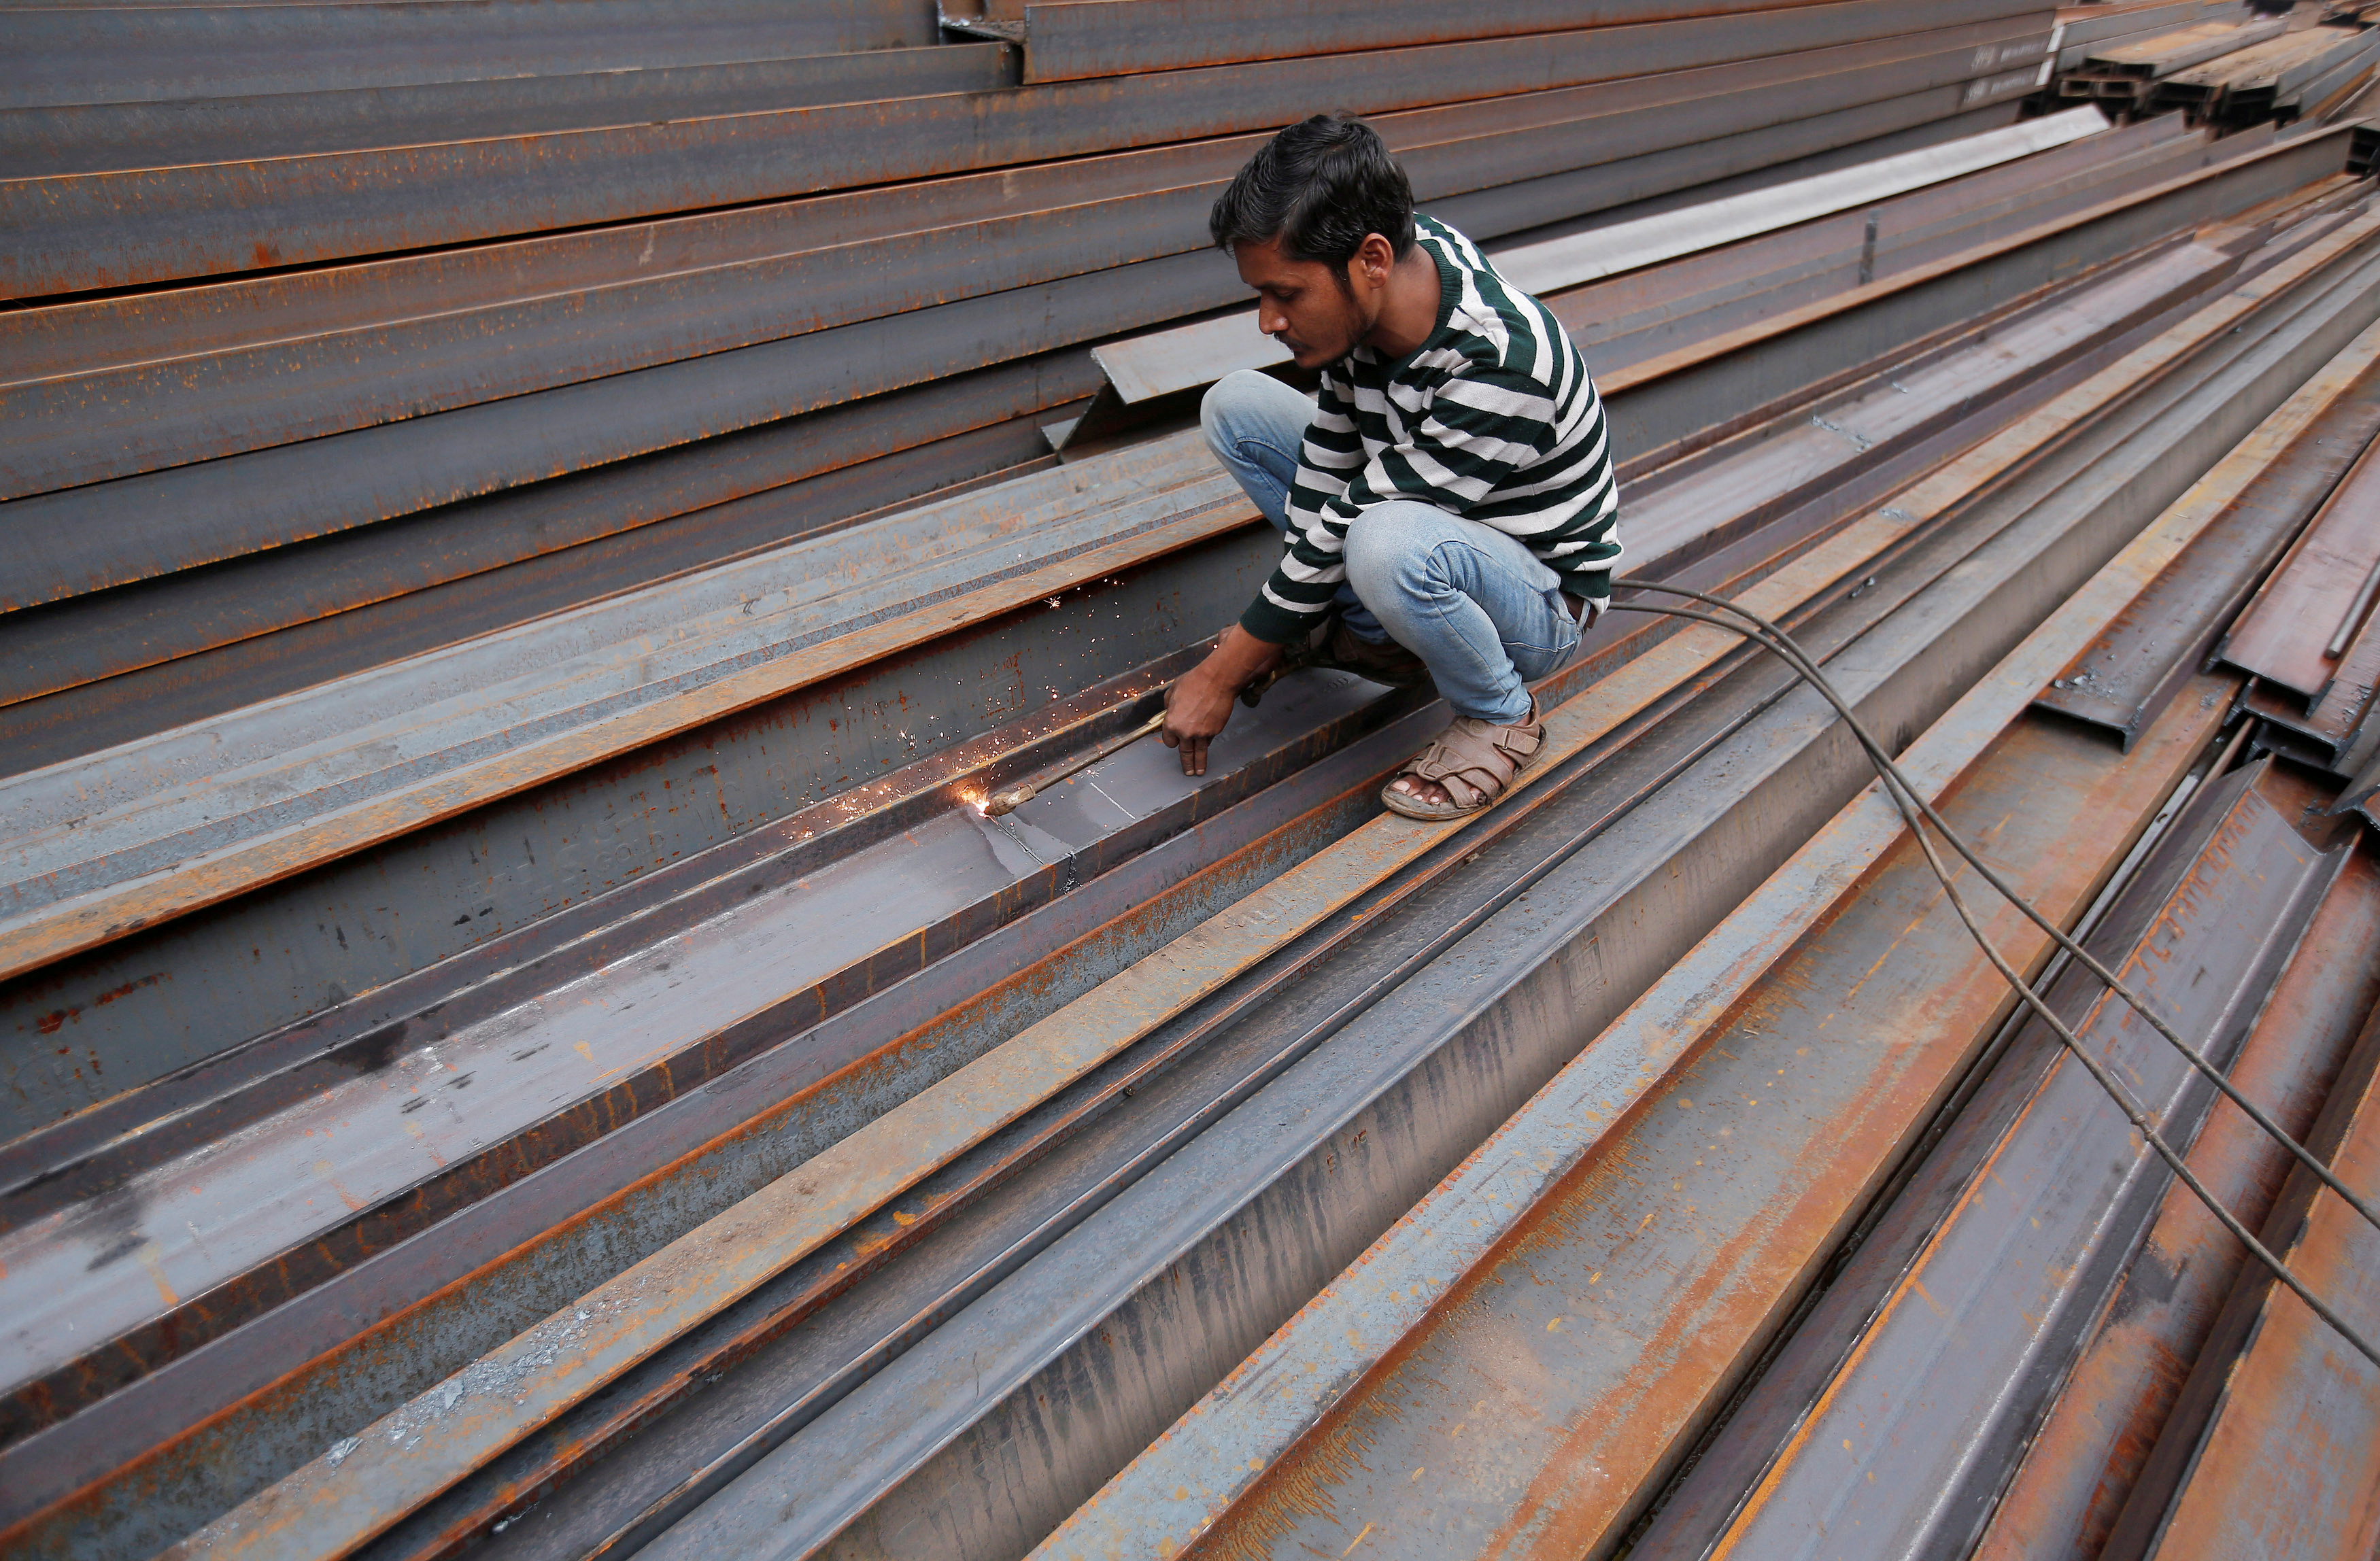 iron and steel in india